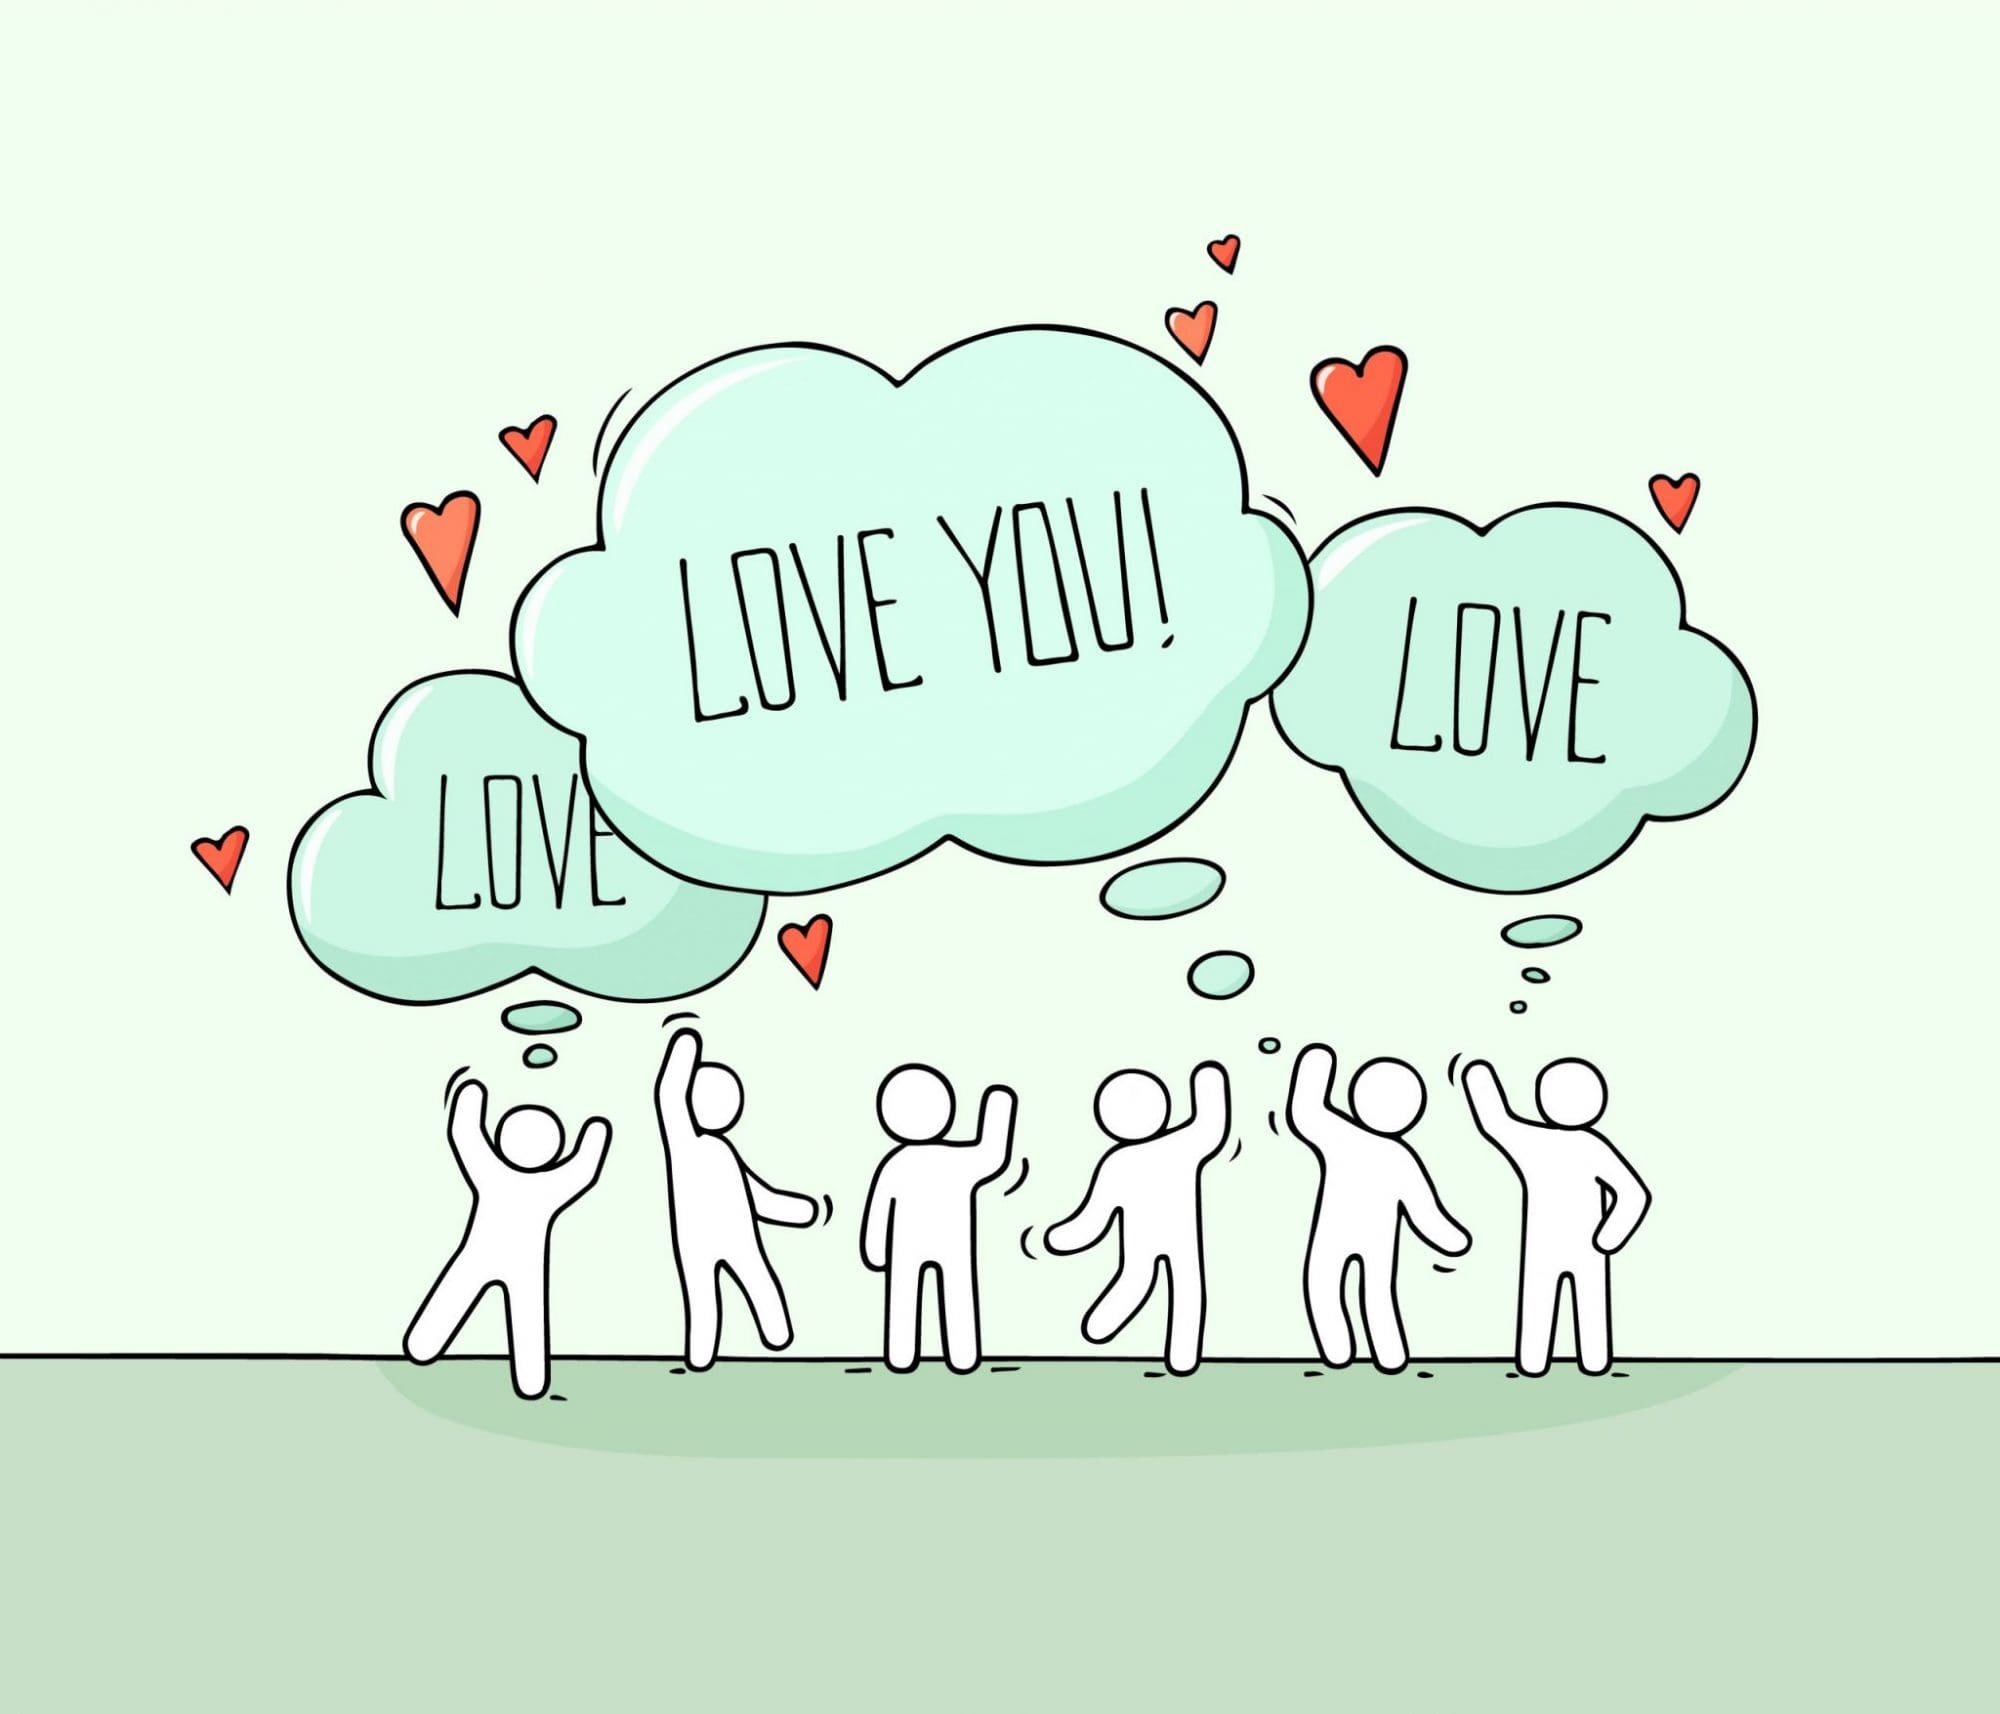 simple image drawing of little bubble person saying love you